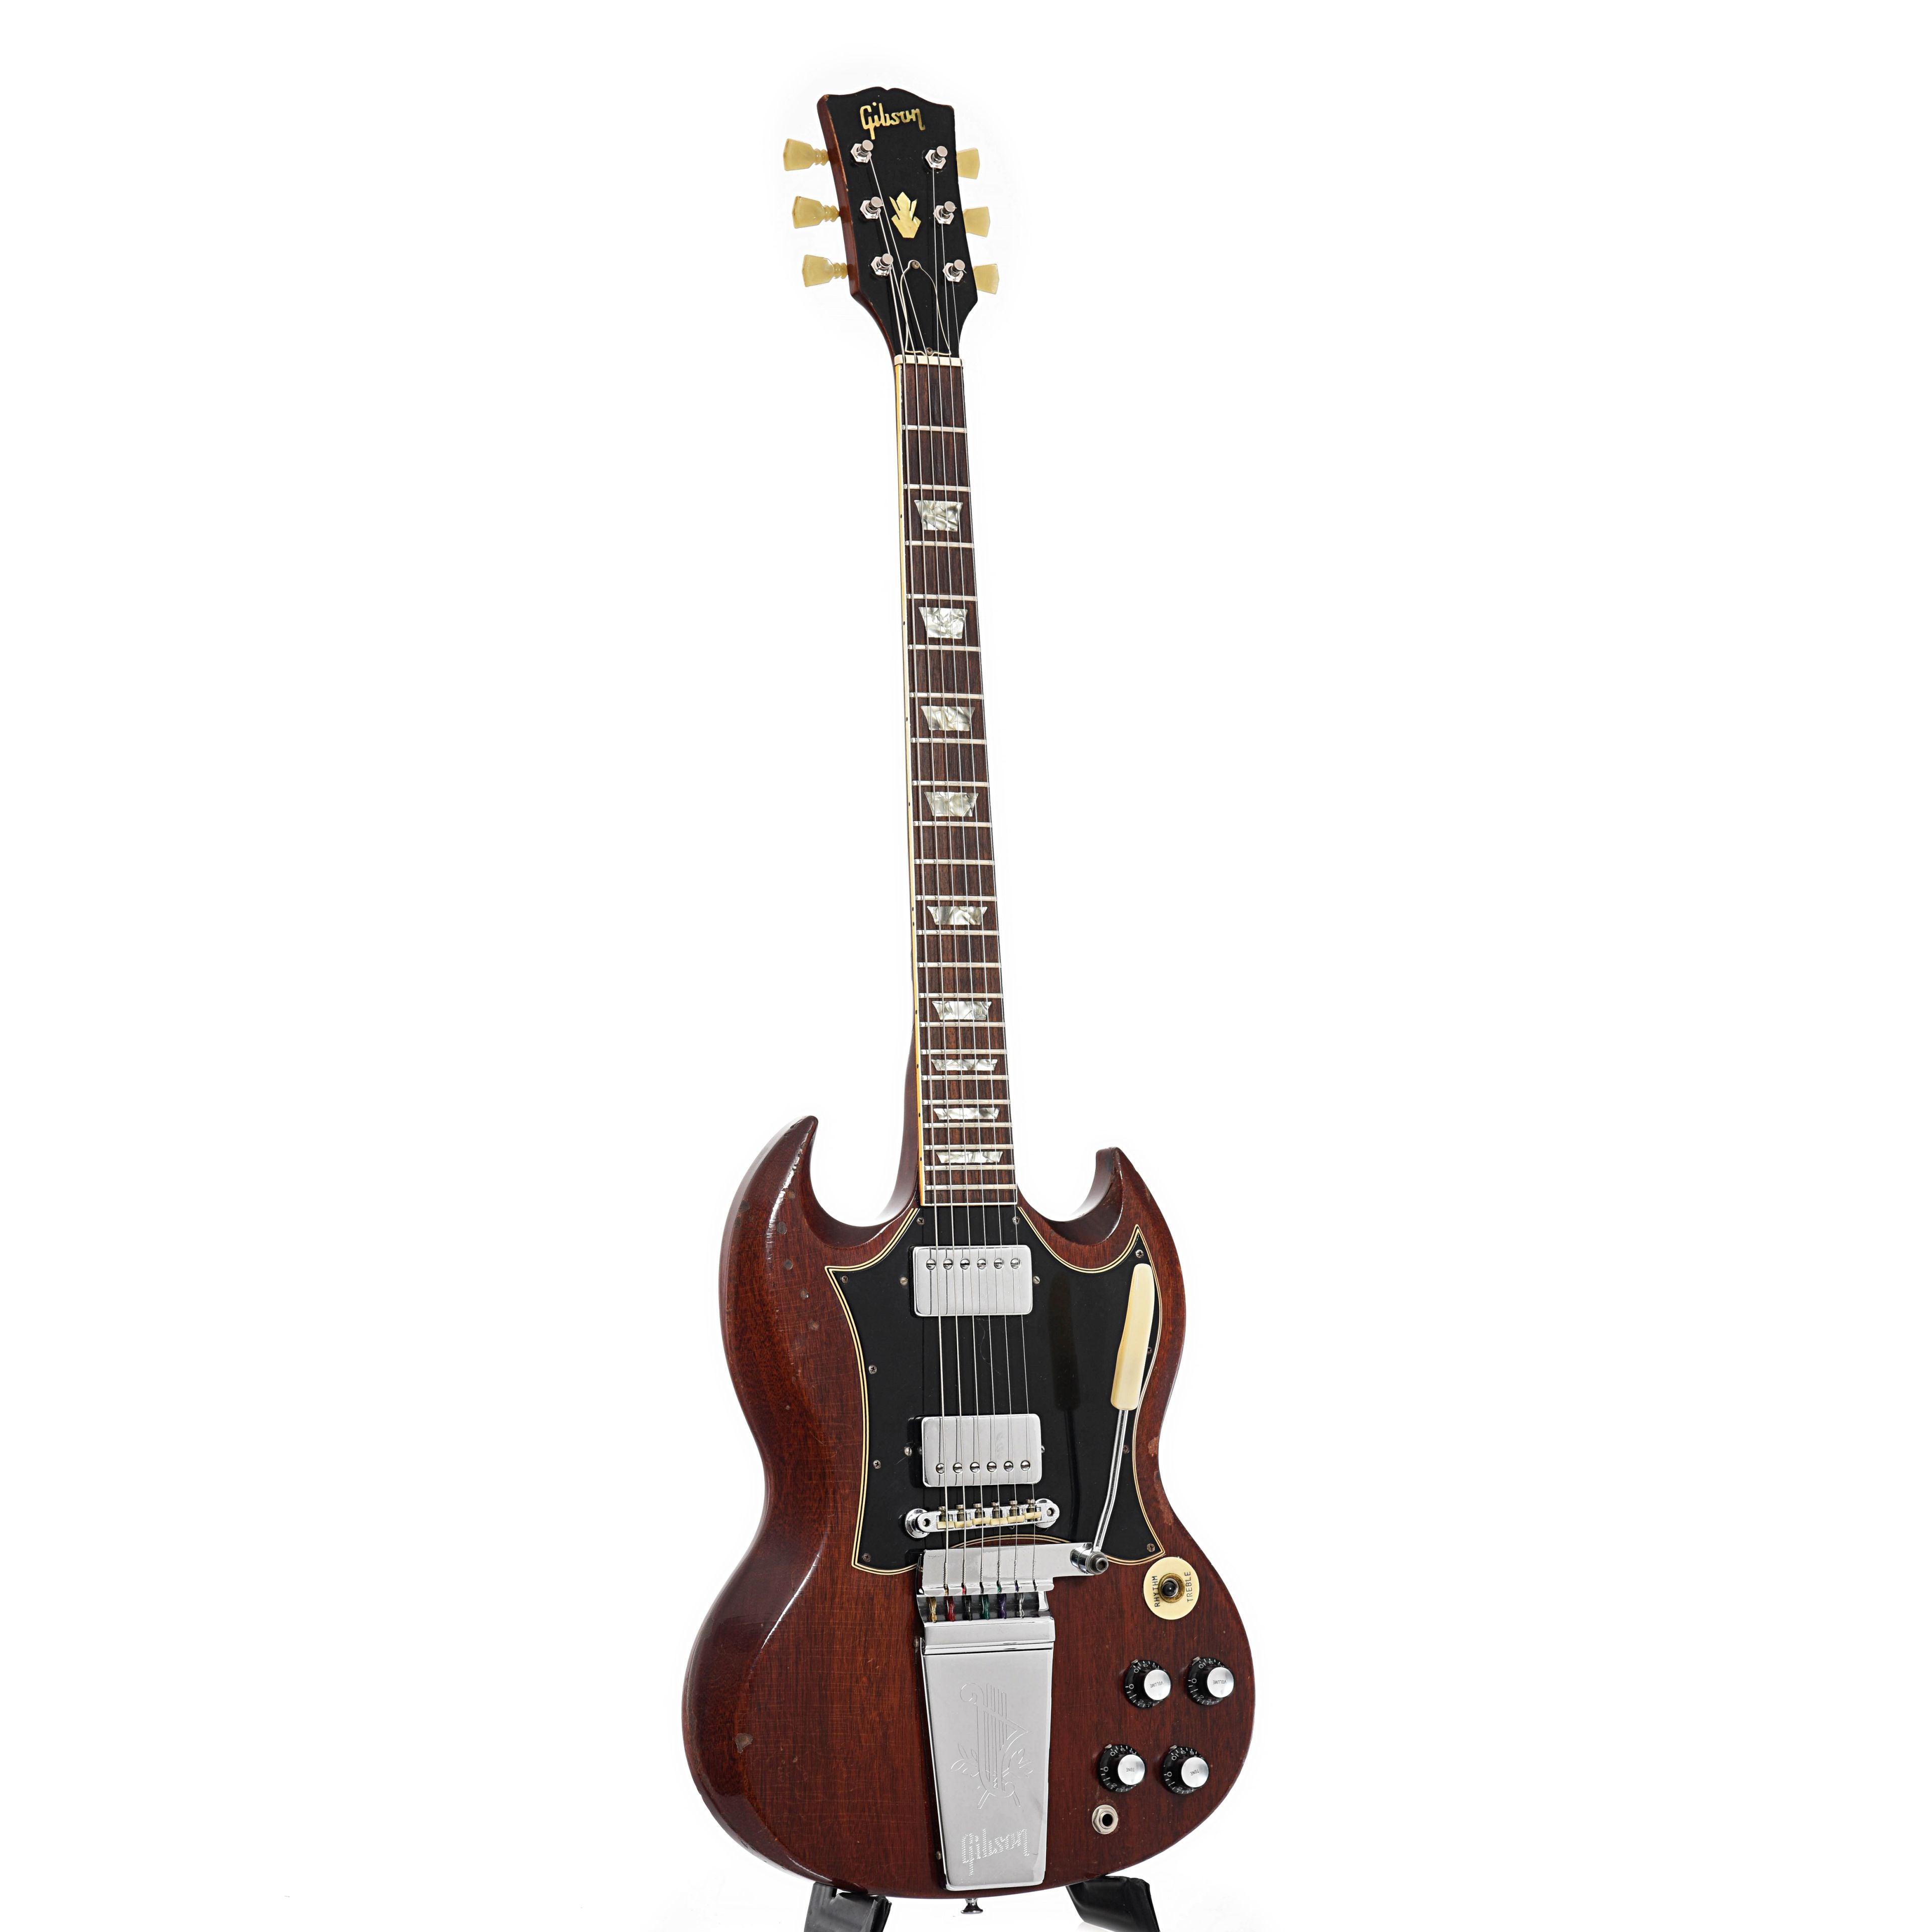 Gibson SG Standard Electric Guitar (late 1965 / early '66 